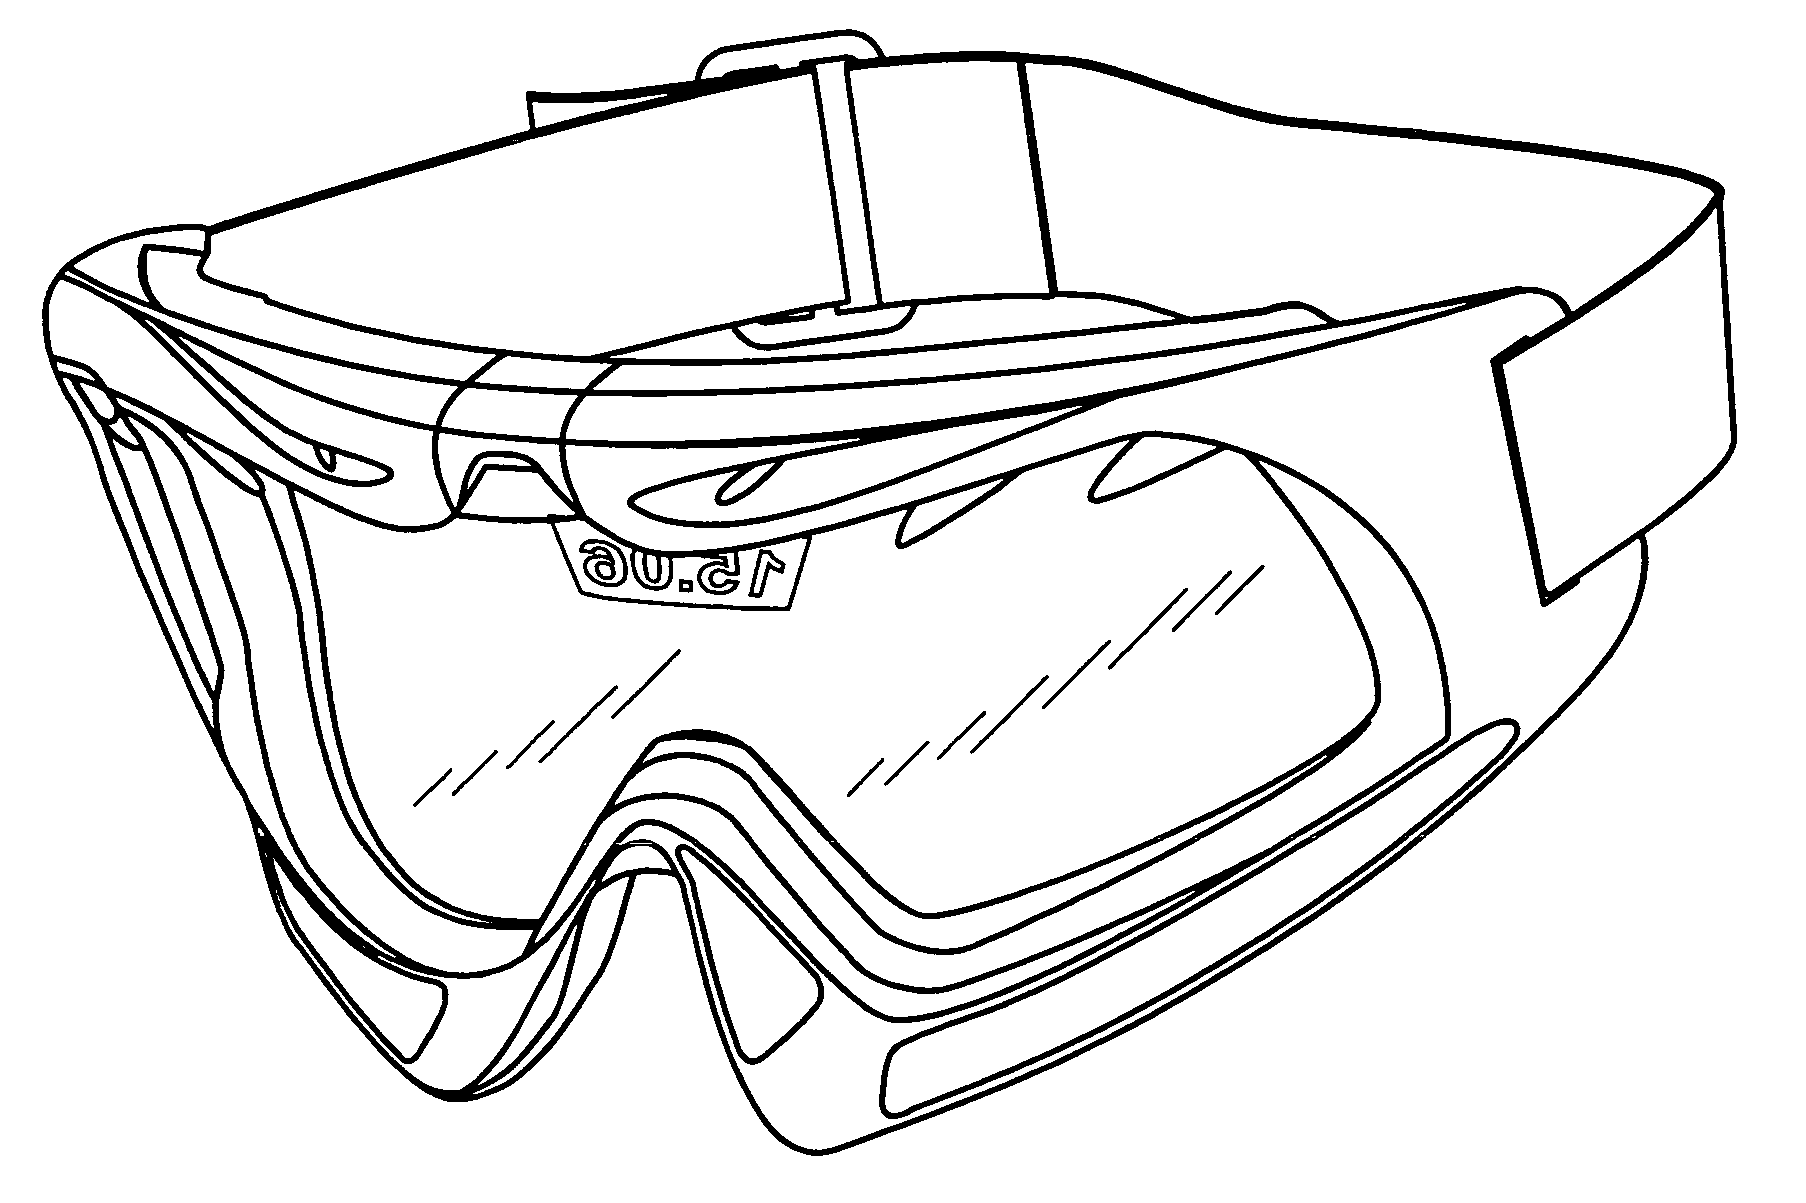 Eyewear with an image projected off of an unassisted eyewear lens to the user